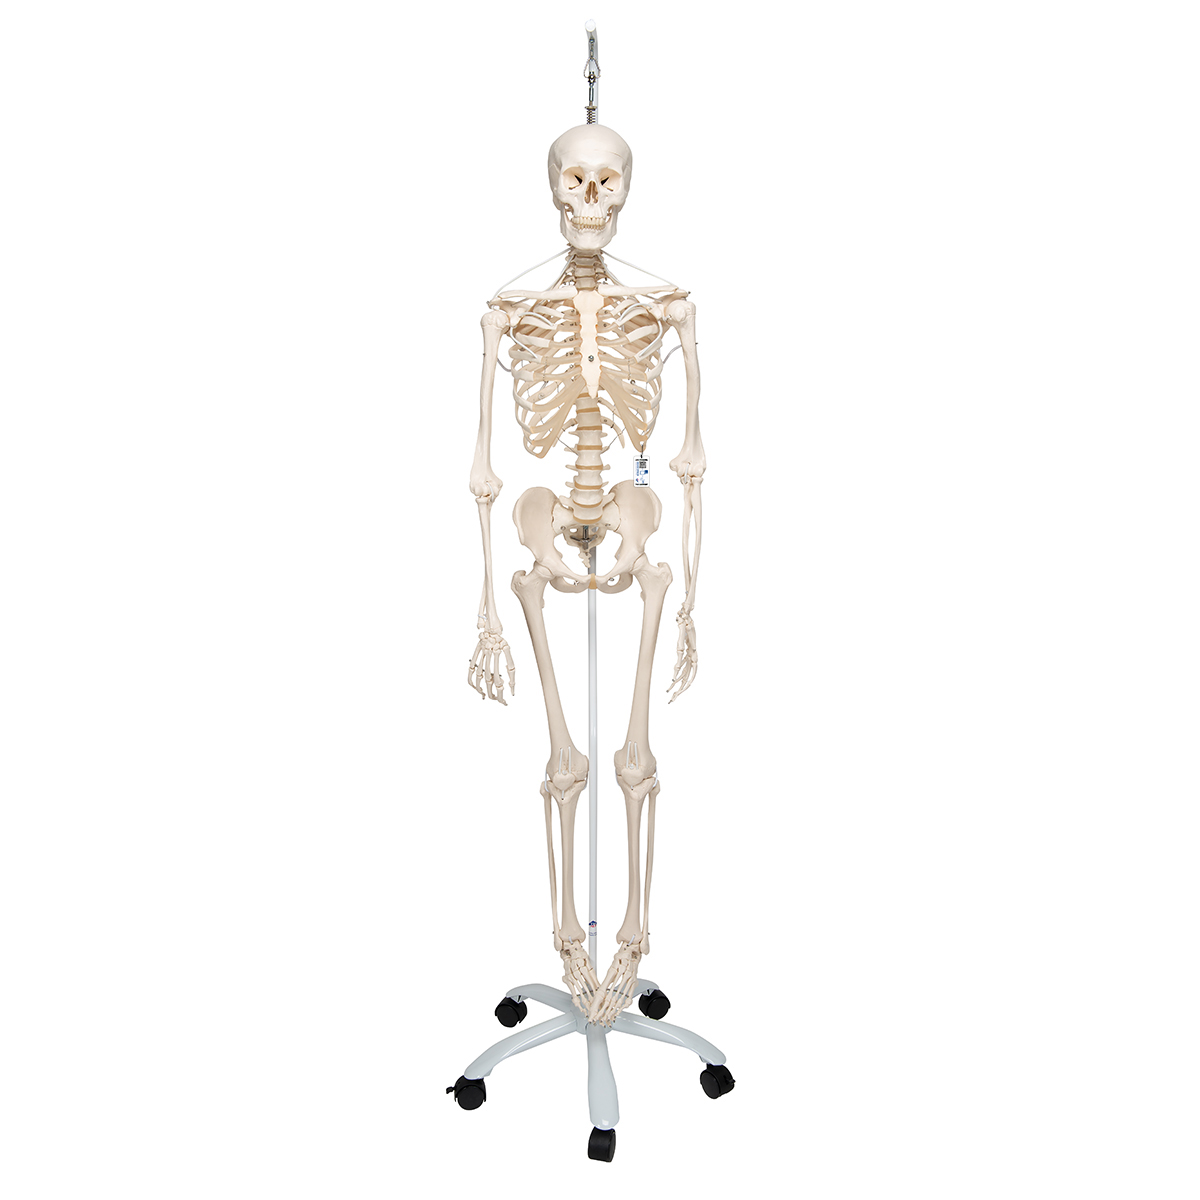 Functional & Physiological Human Skeleton Model Frank on Hanging Stand - 3B Smart Anatomy